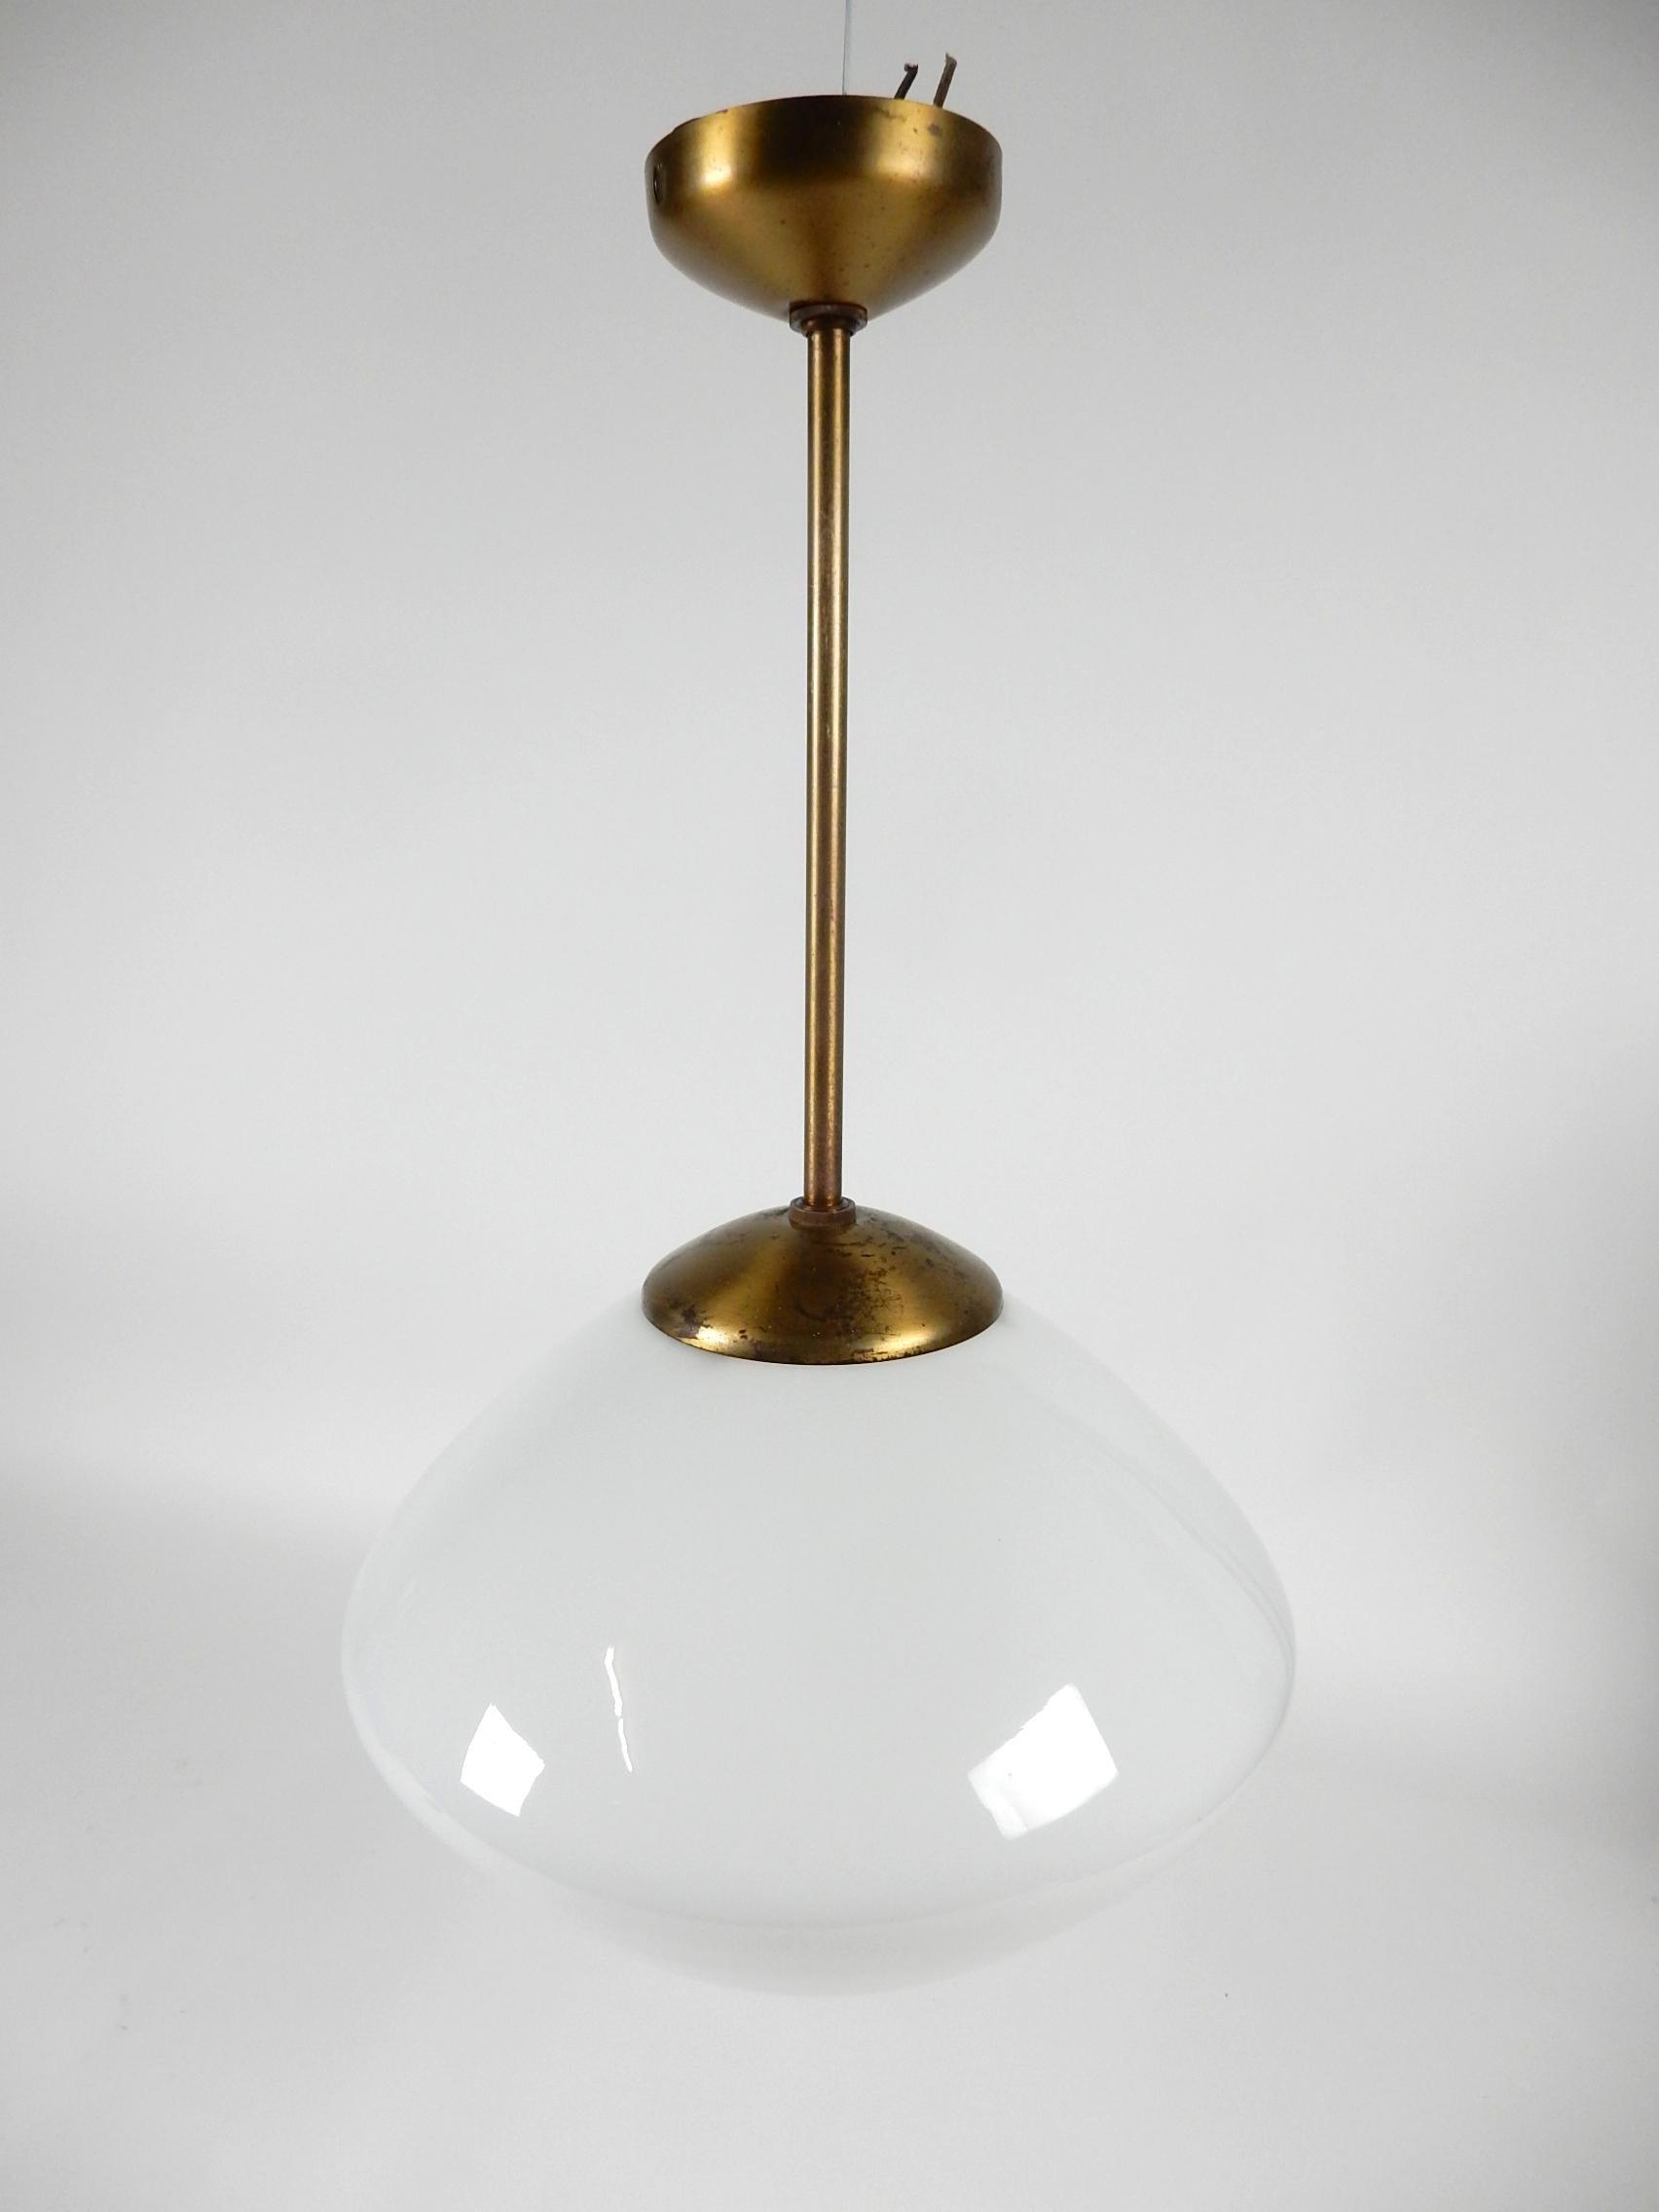 Mid-Century Modern American Modernism Pendant Chandelier by The Miller Company, 1940s